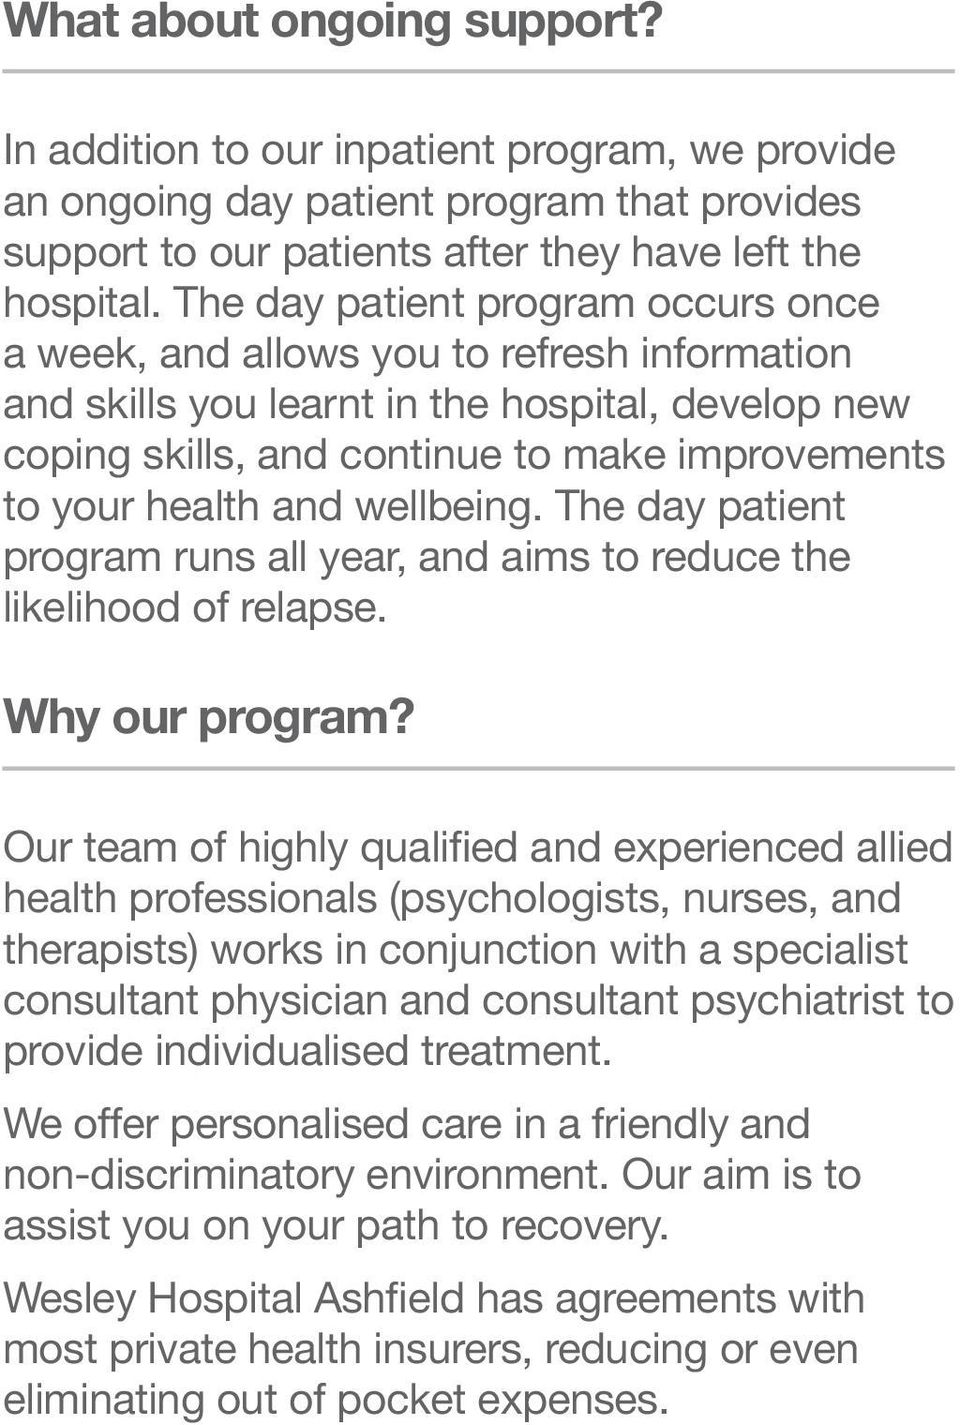 and wellbeing. The day patient program runs all year, and aims to reduce the likelihood of relapse. Why our program?